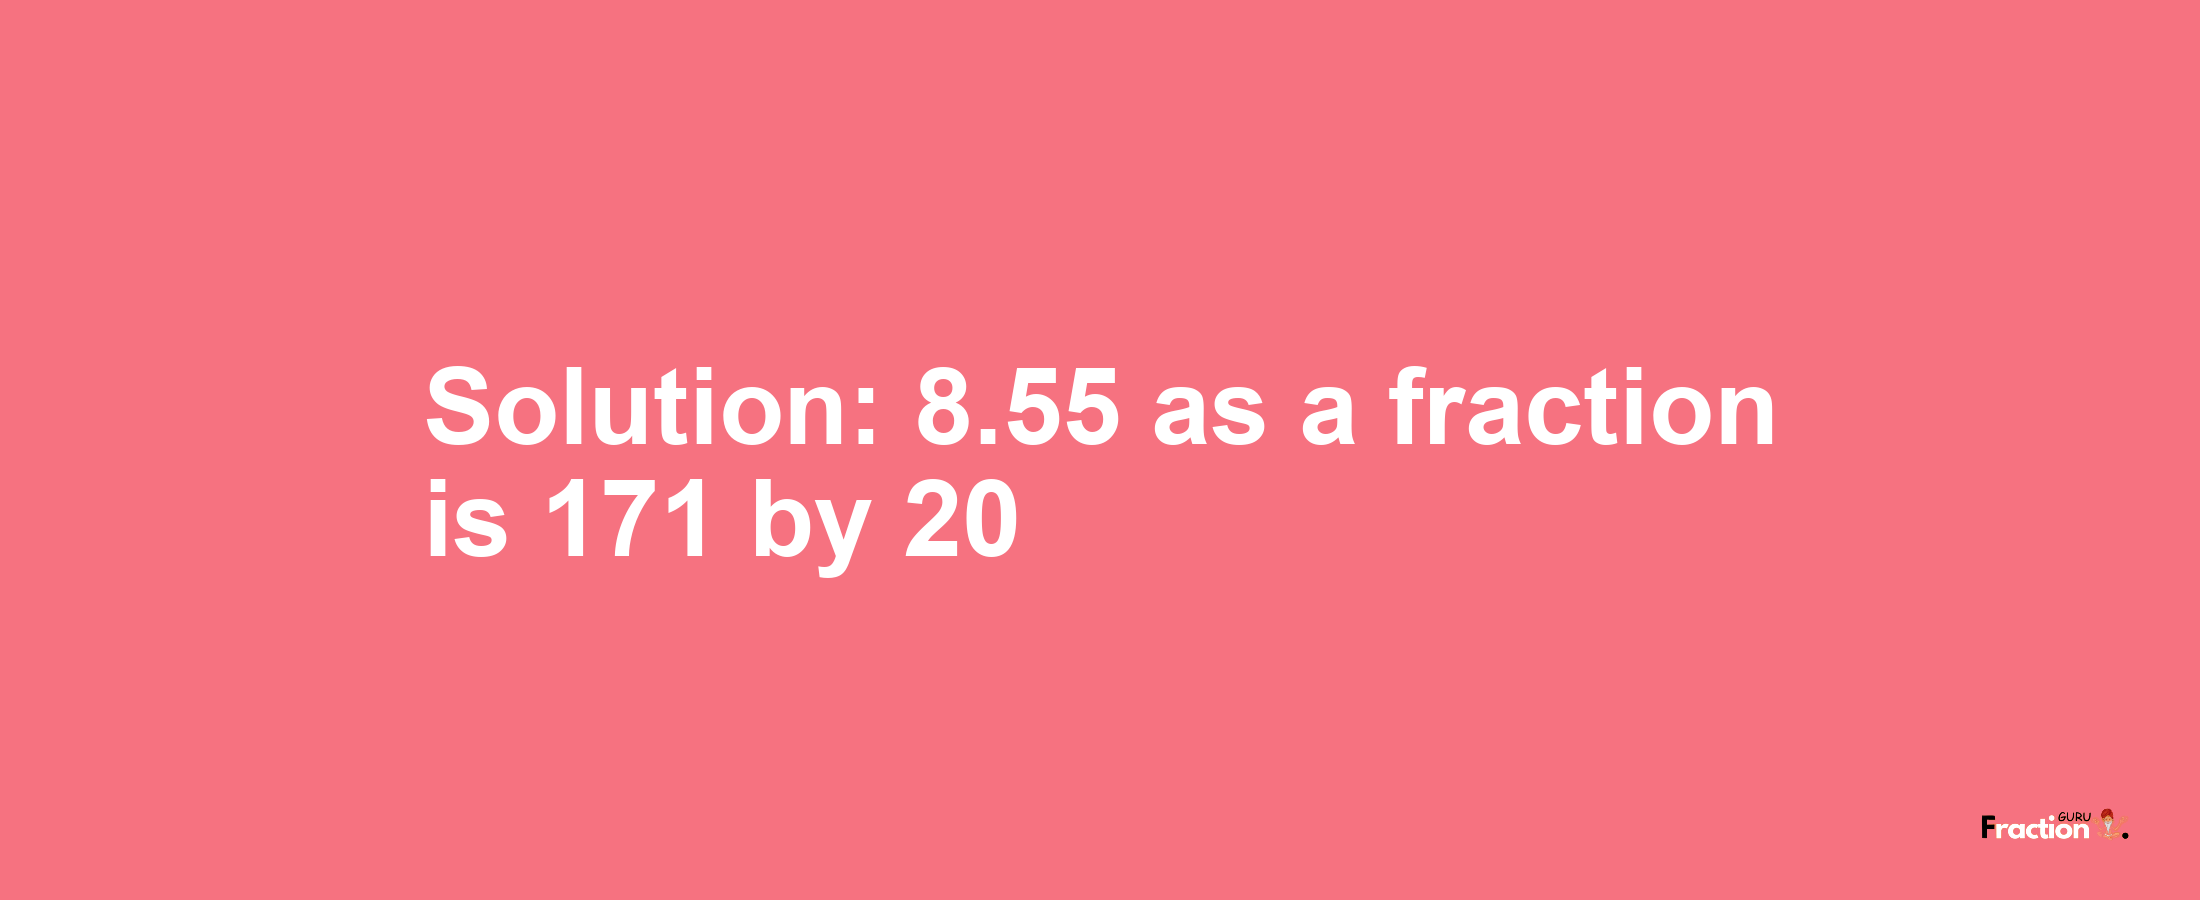 Solution:8.55 as a fraction is 171/20